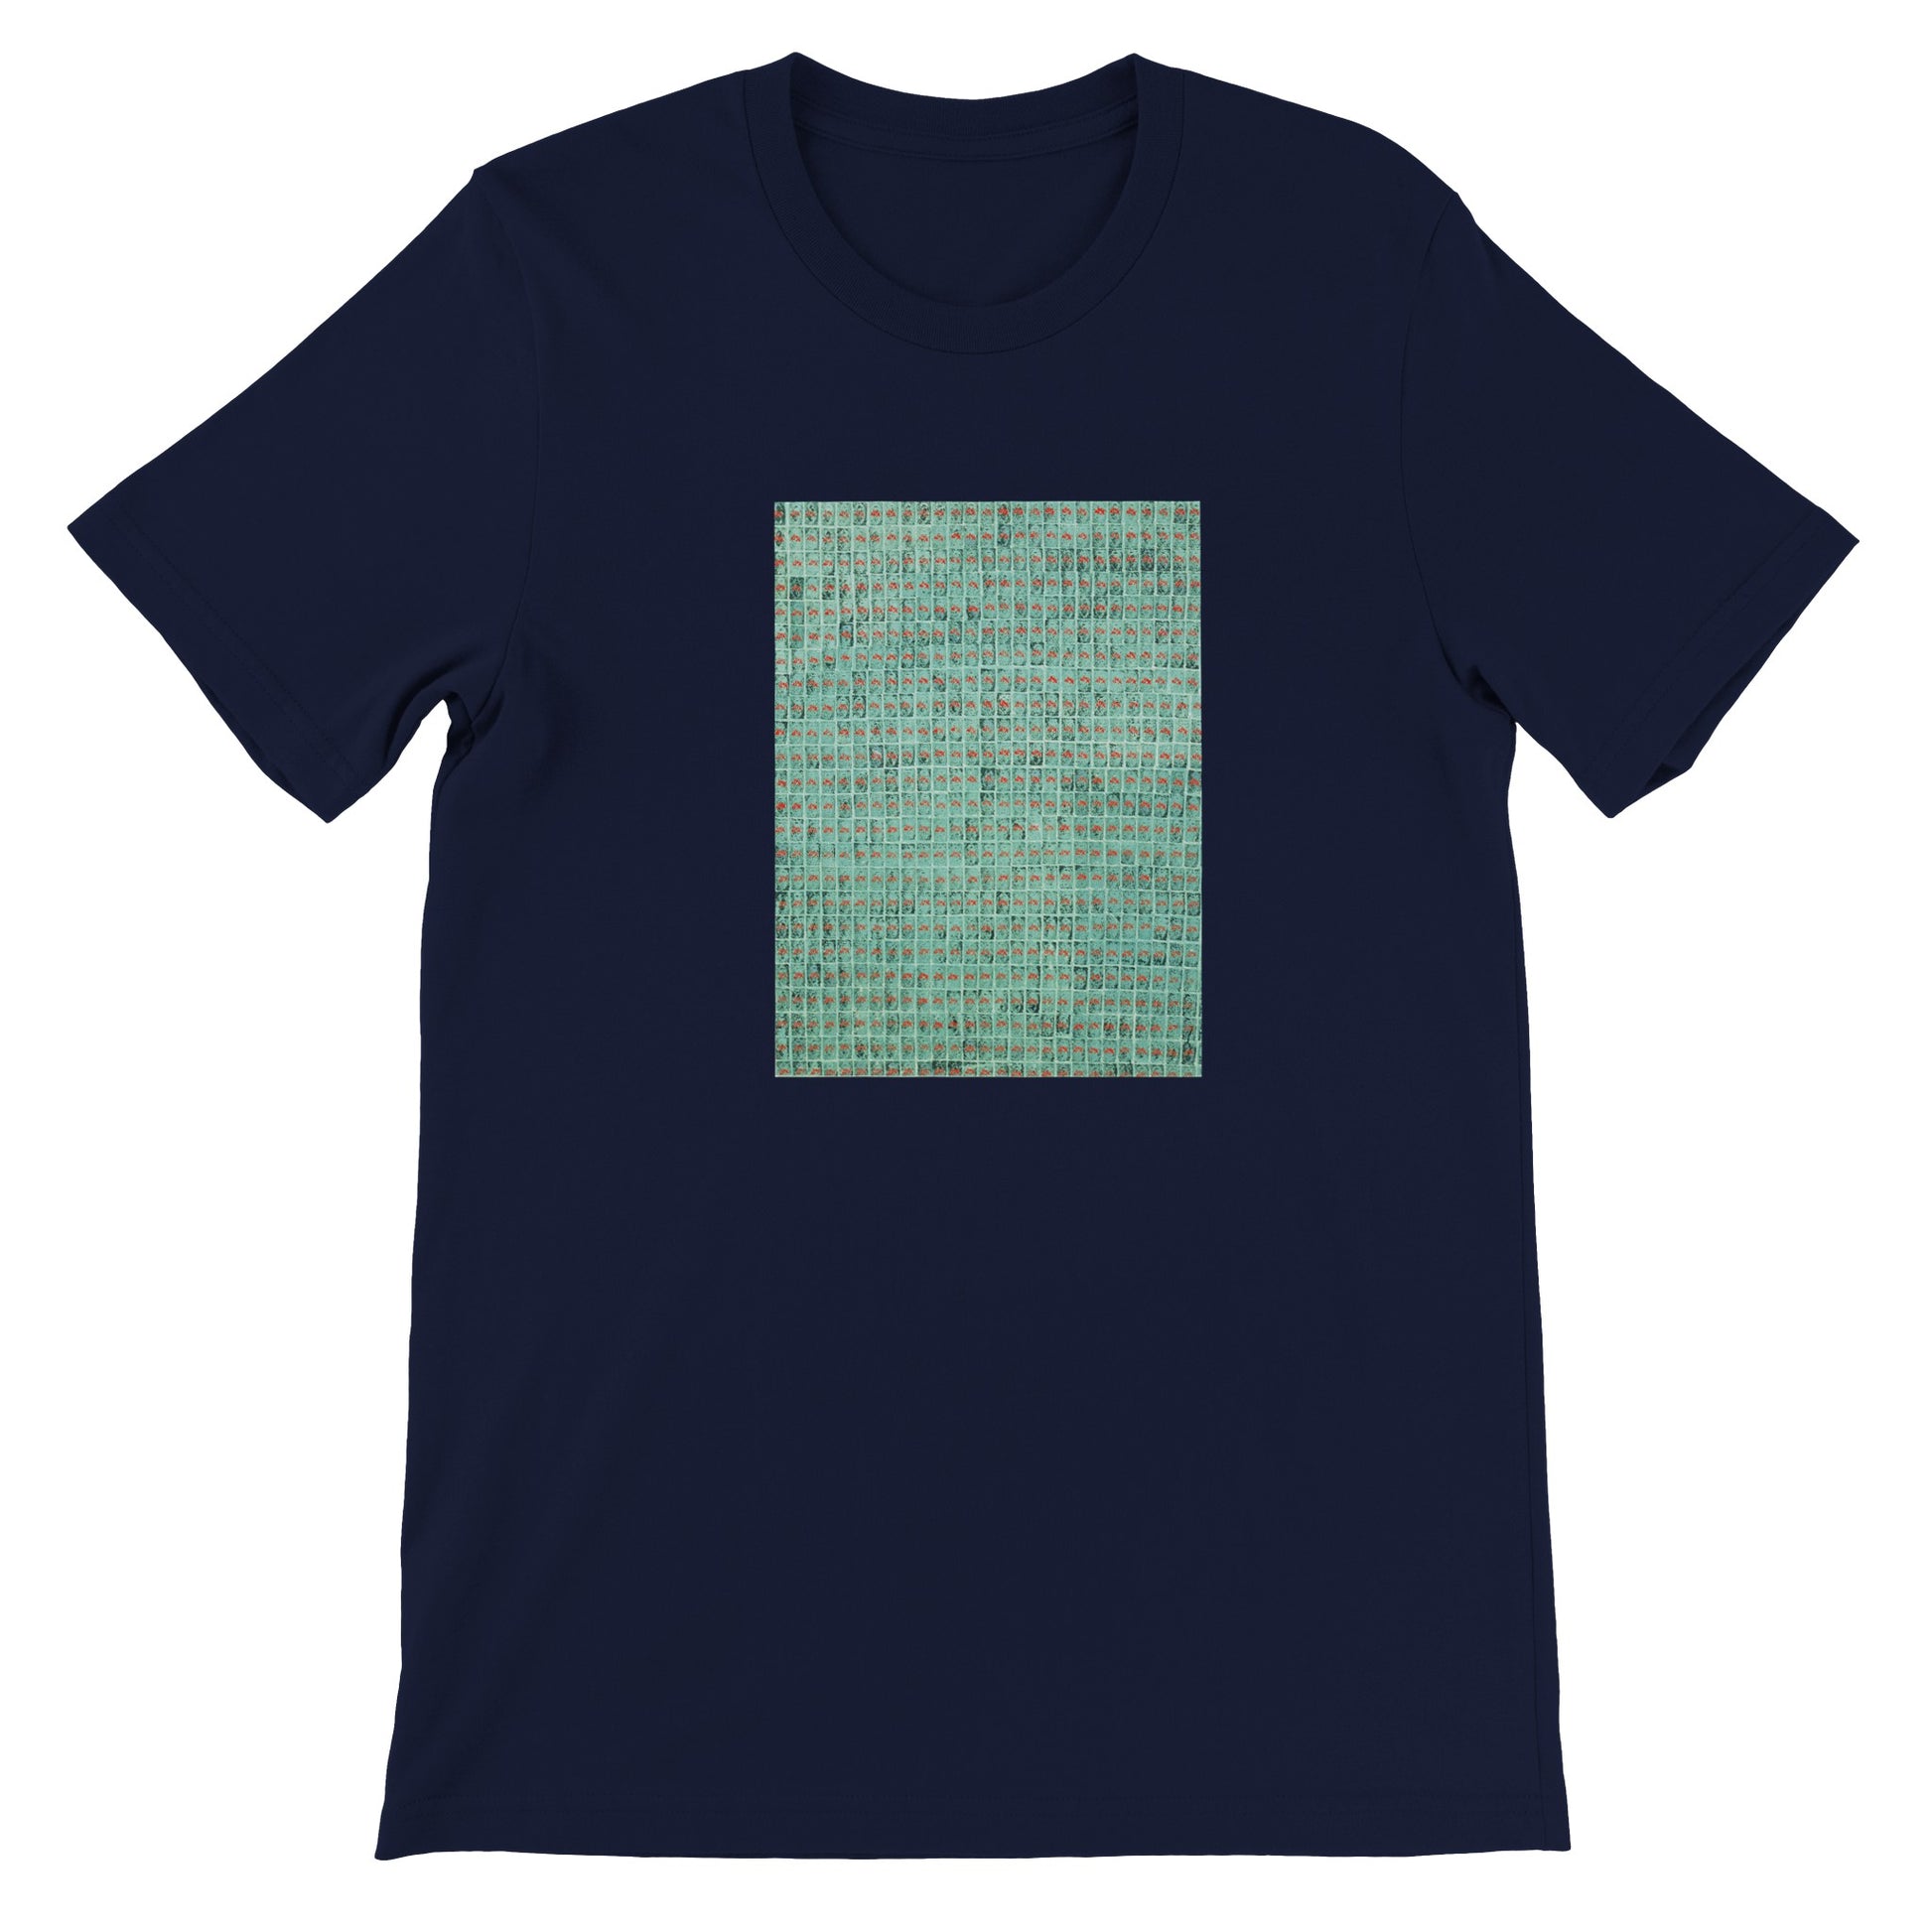 a t - shirt with a blue and green background